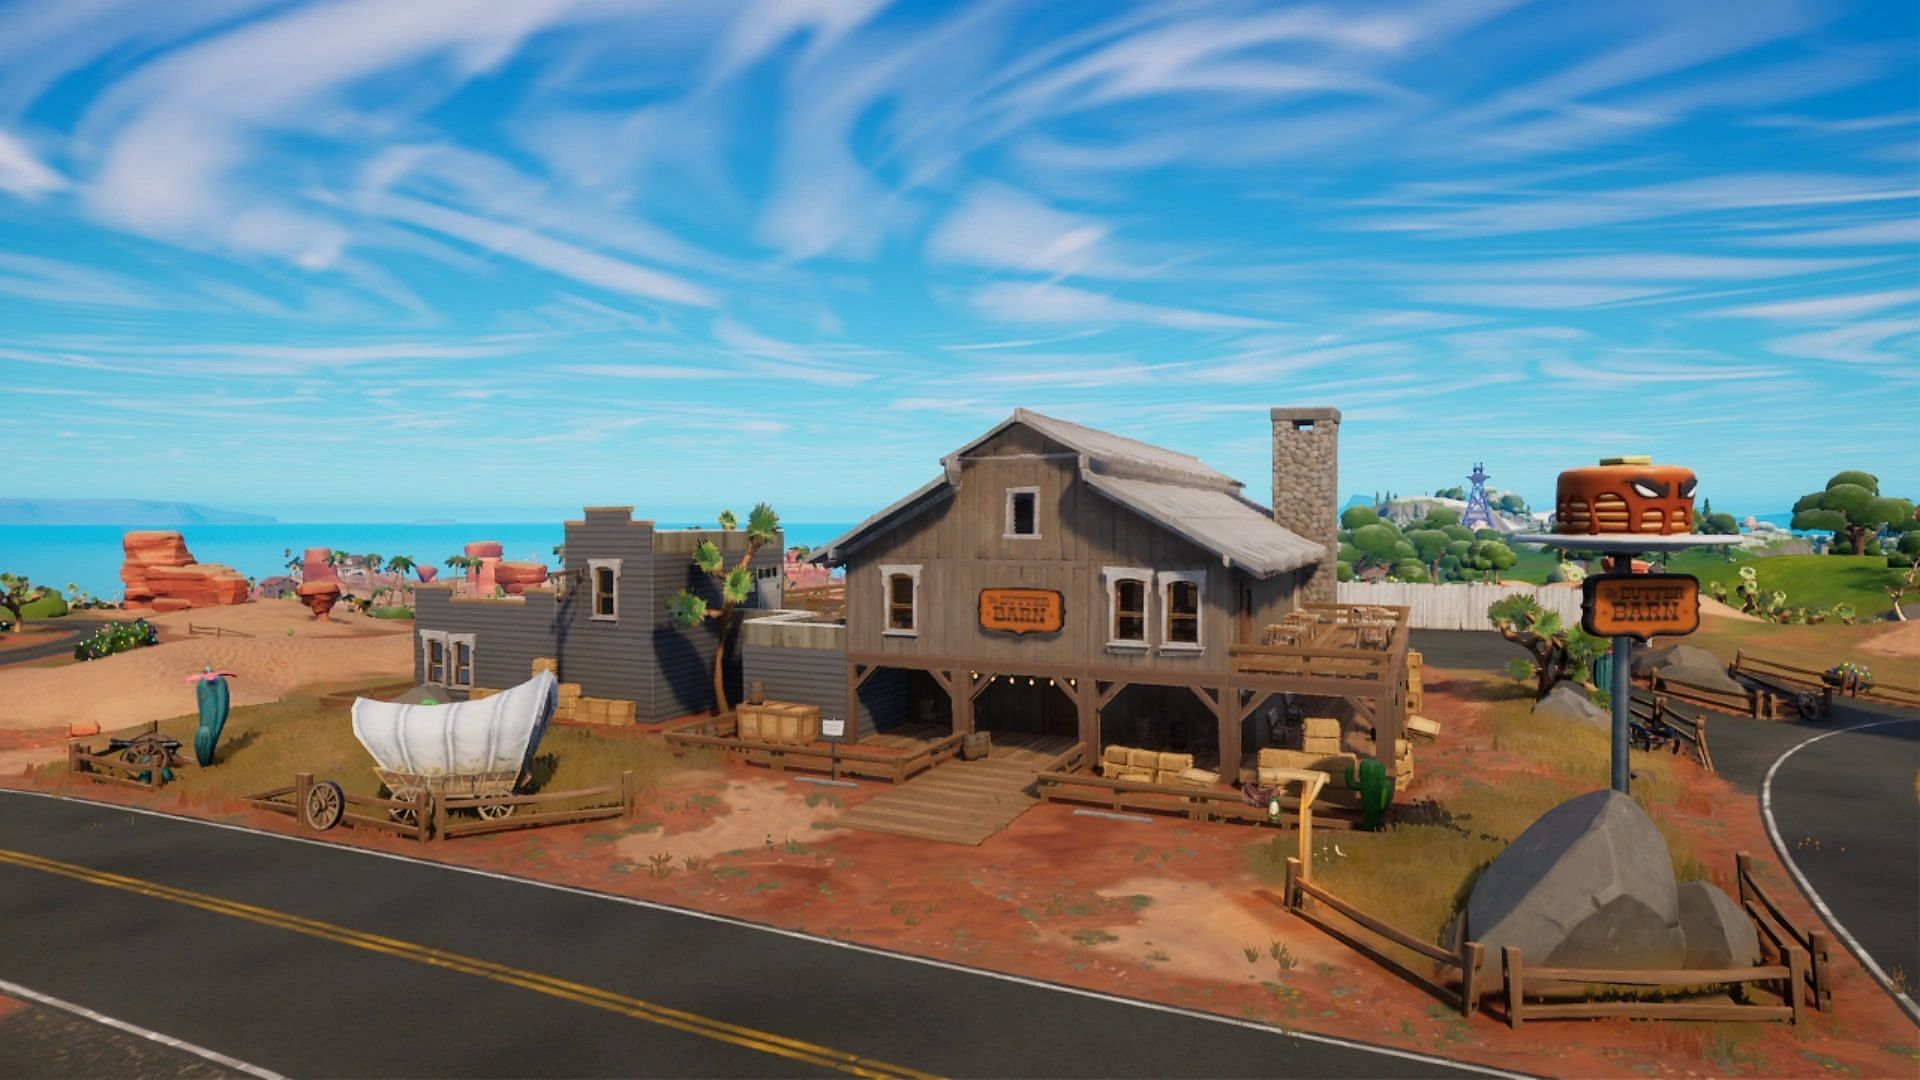 Butter Barn has been changed with the latest Fortnite map changes (Image via Epic Games)